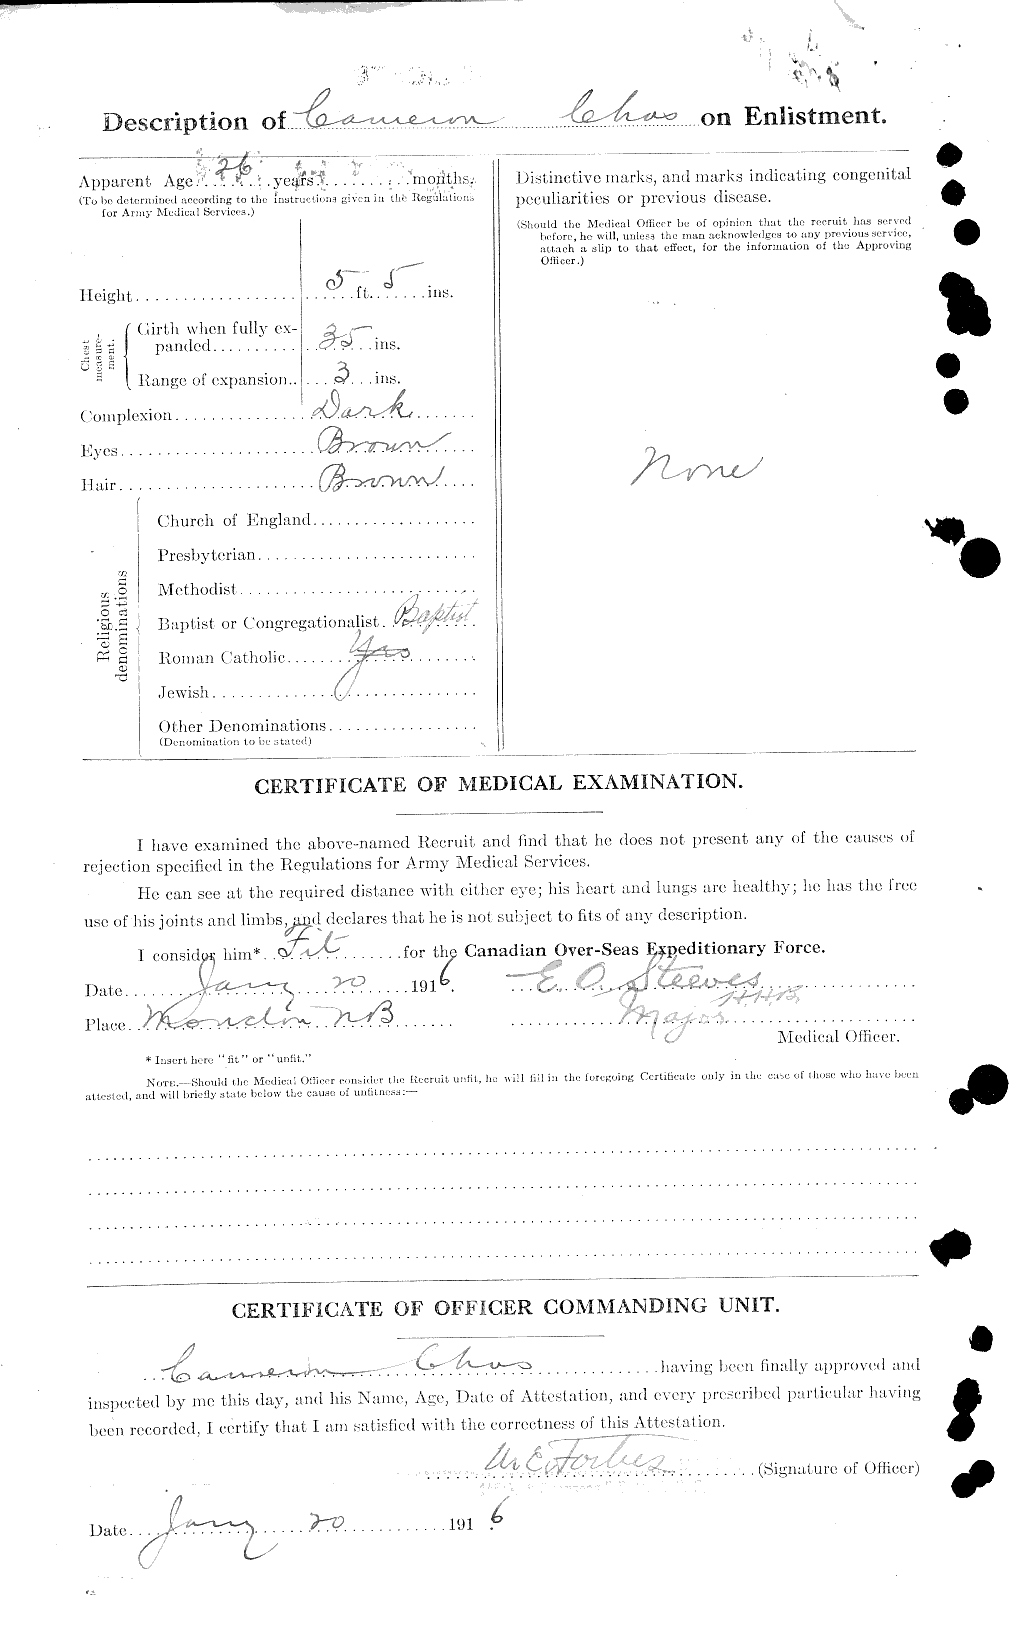 Personnel Records of the First World War - CEF 002594b